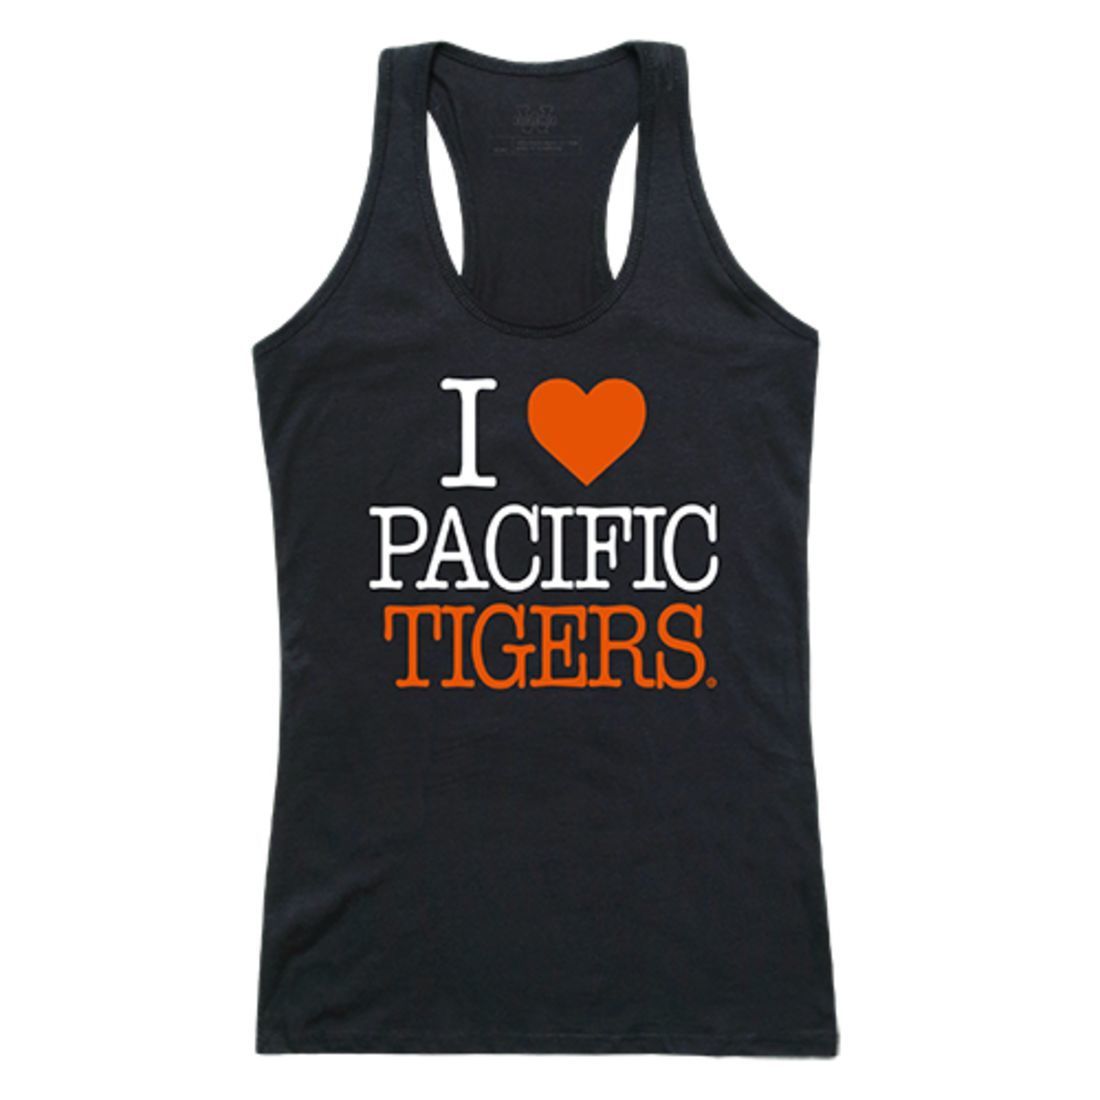 University of the Pacific Tigers Womens Love Tank Top Tee T-Shirt Black-Campus-Wardrobe